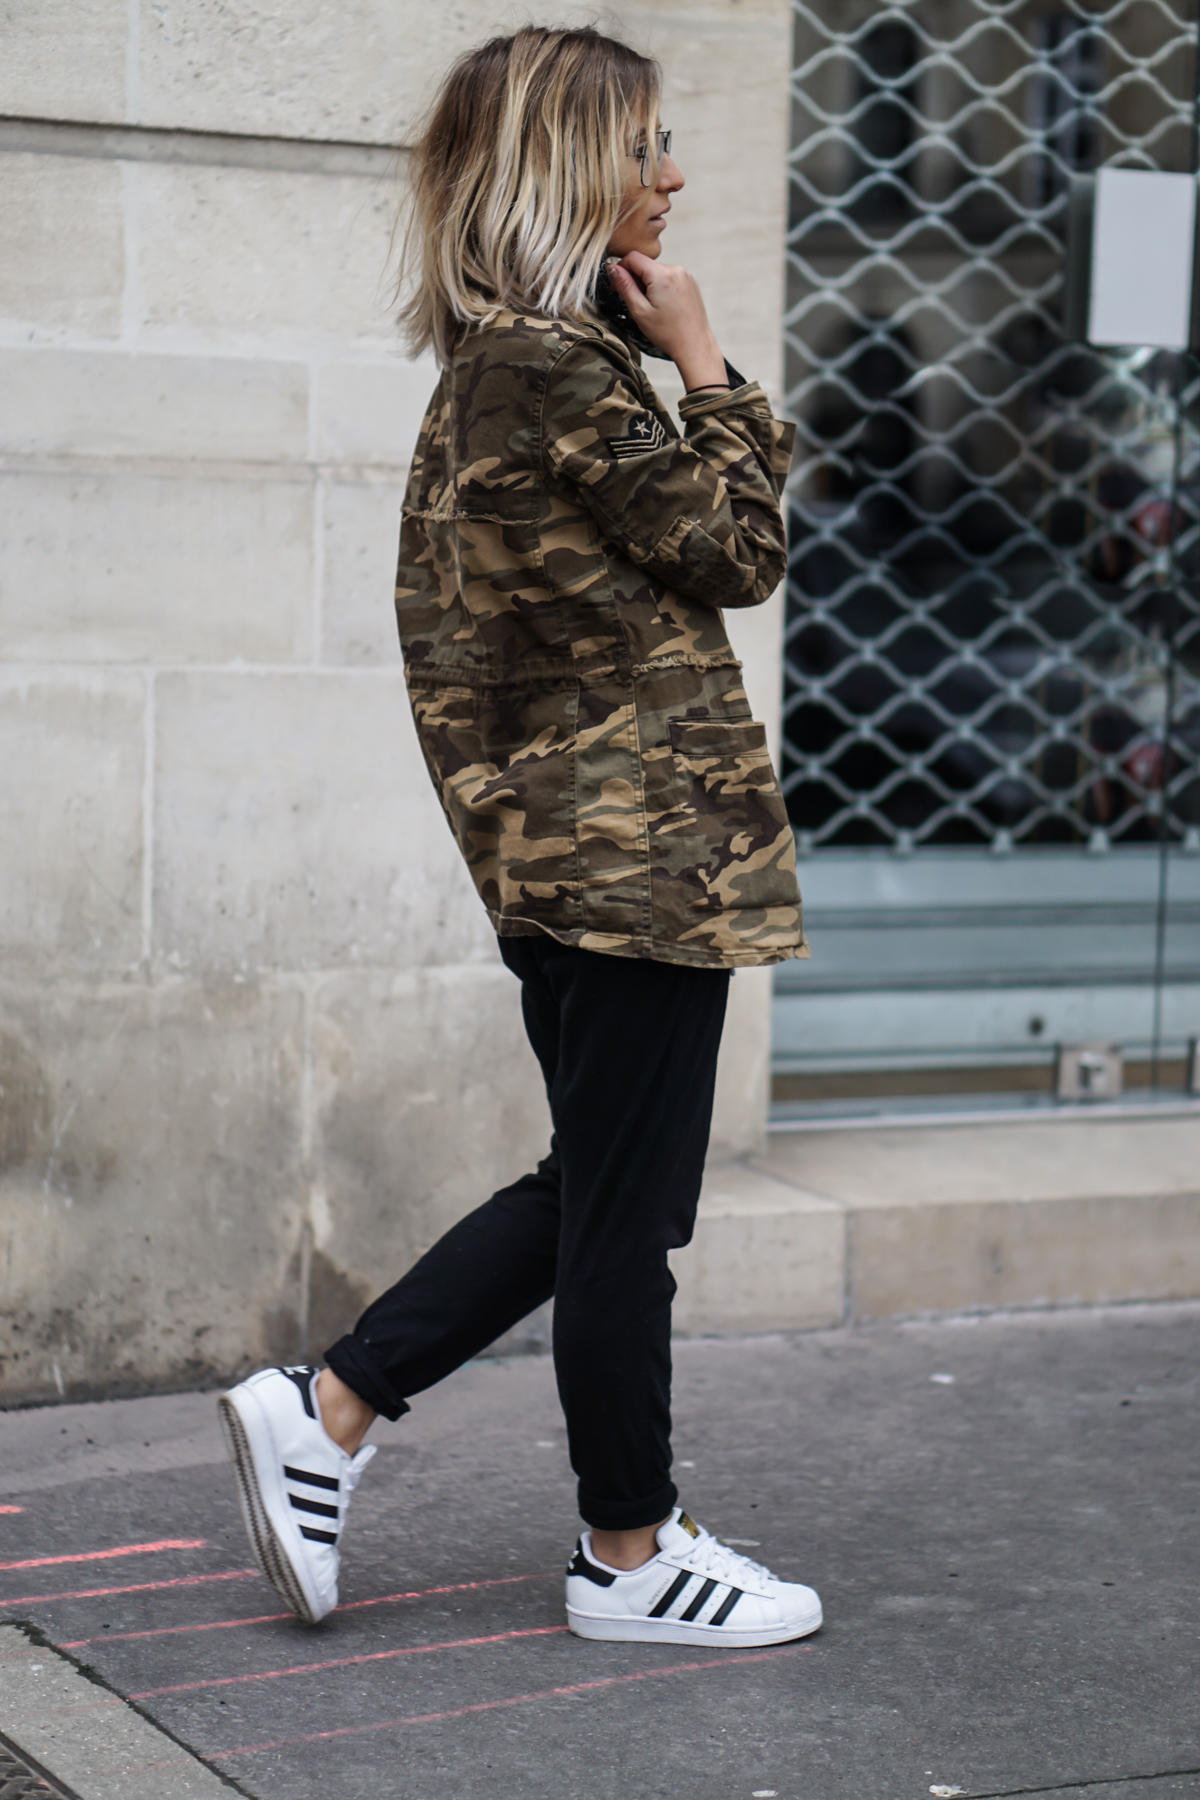 Nothing screams military more than a camouflage coat! Camille Callen rocks this Mango jacket, paired with androgynous style joggers and a pair of classic Adidas Superstars. Jacket: Mango, Joggers: Forever 21, Top: Zara, Sneakers: Adidas.